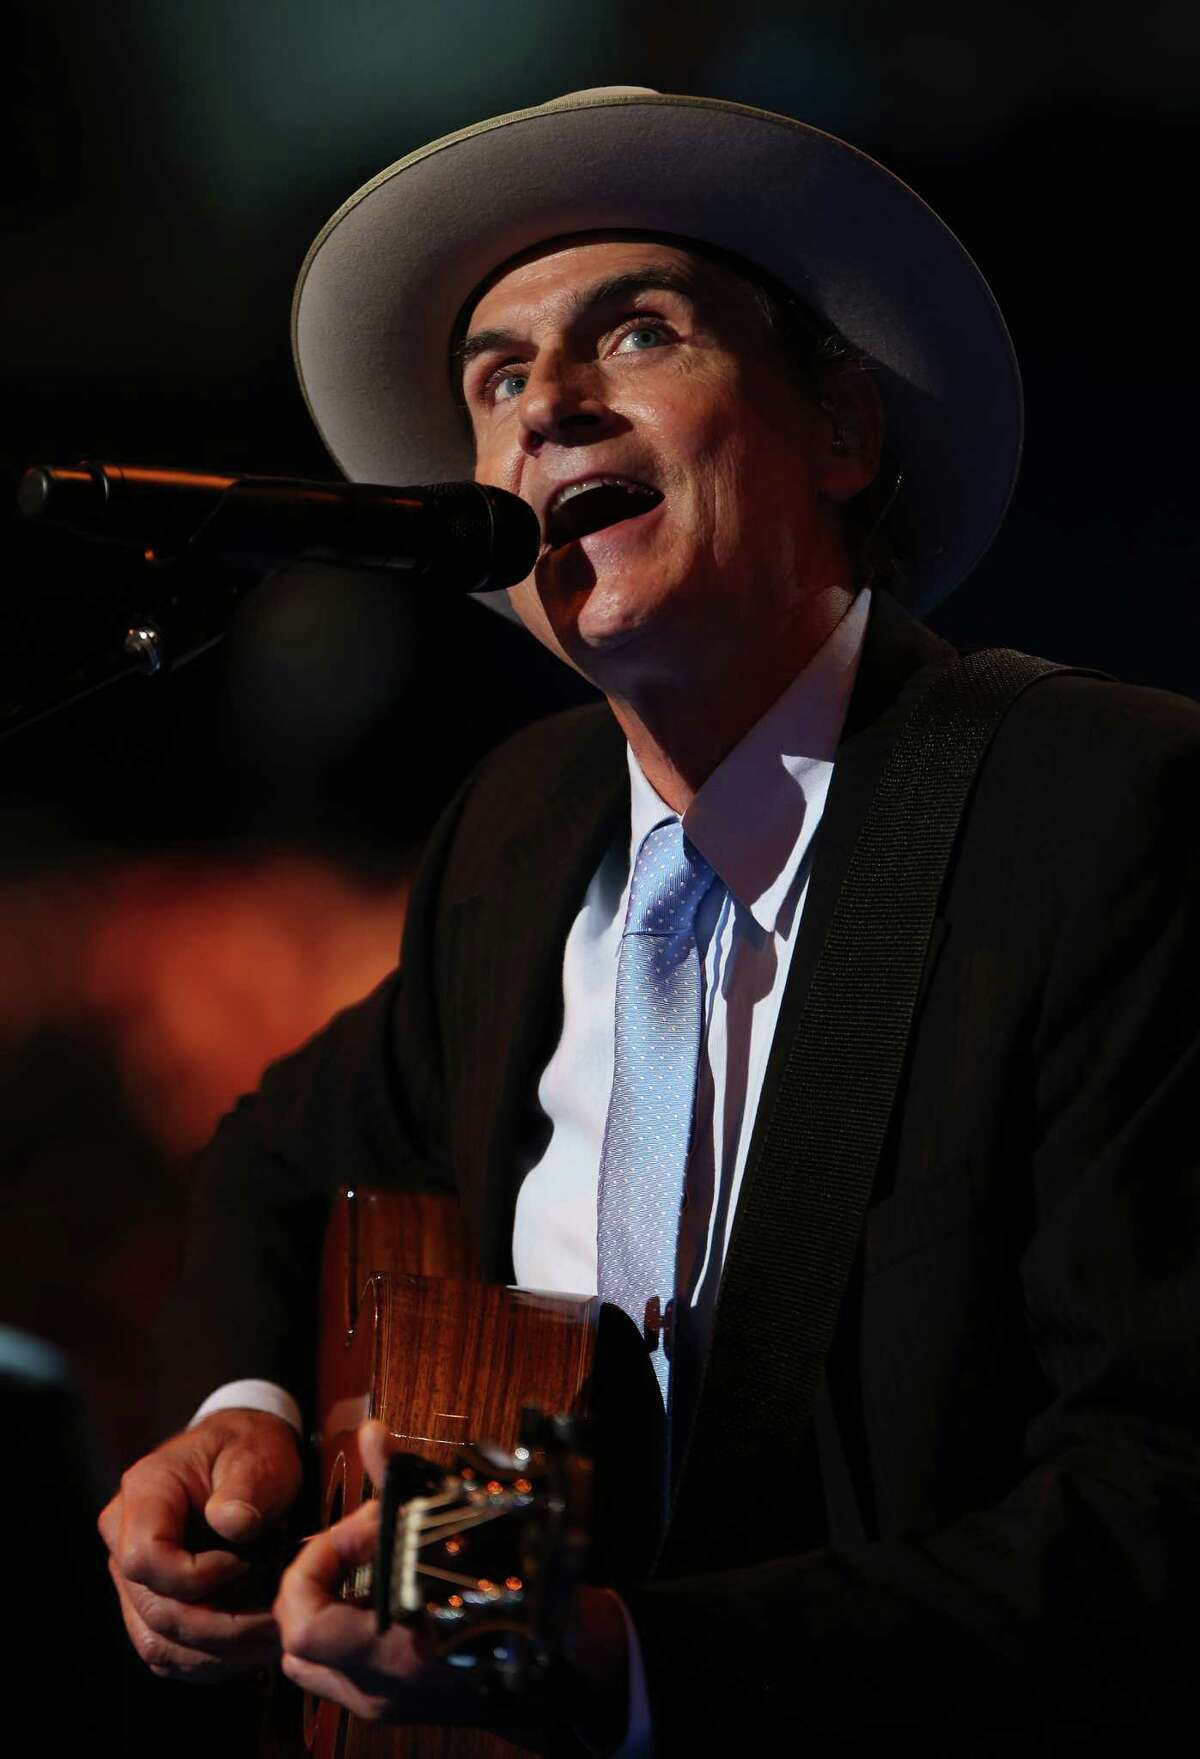 CHARLOTTE, NC - SEPTEMBER 06: Musician James Taylor performs on stage during the final day of the Democratic National Convention at Time Warner Cable Arena on September 6, 2012 in Charlotte, North Carolina. The DNC, which concludes today, nominated U.S. President Barack Obama as the Democratic presidential candidate. (Photo by Chip Somodevilla/Getty Images)